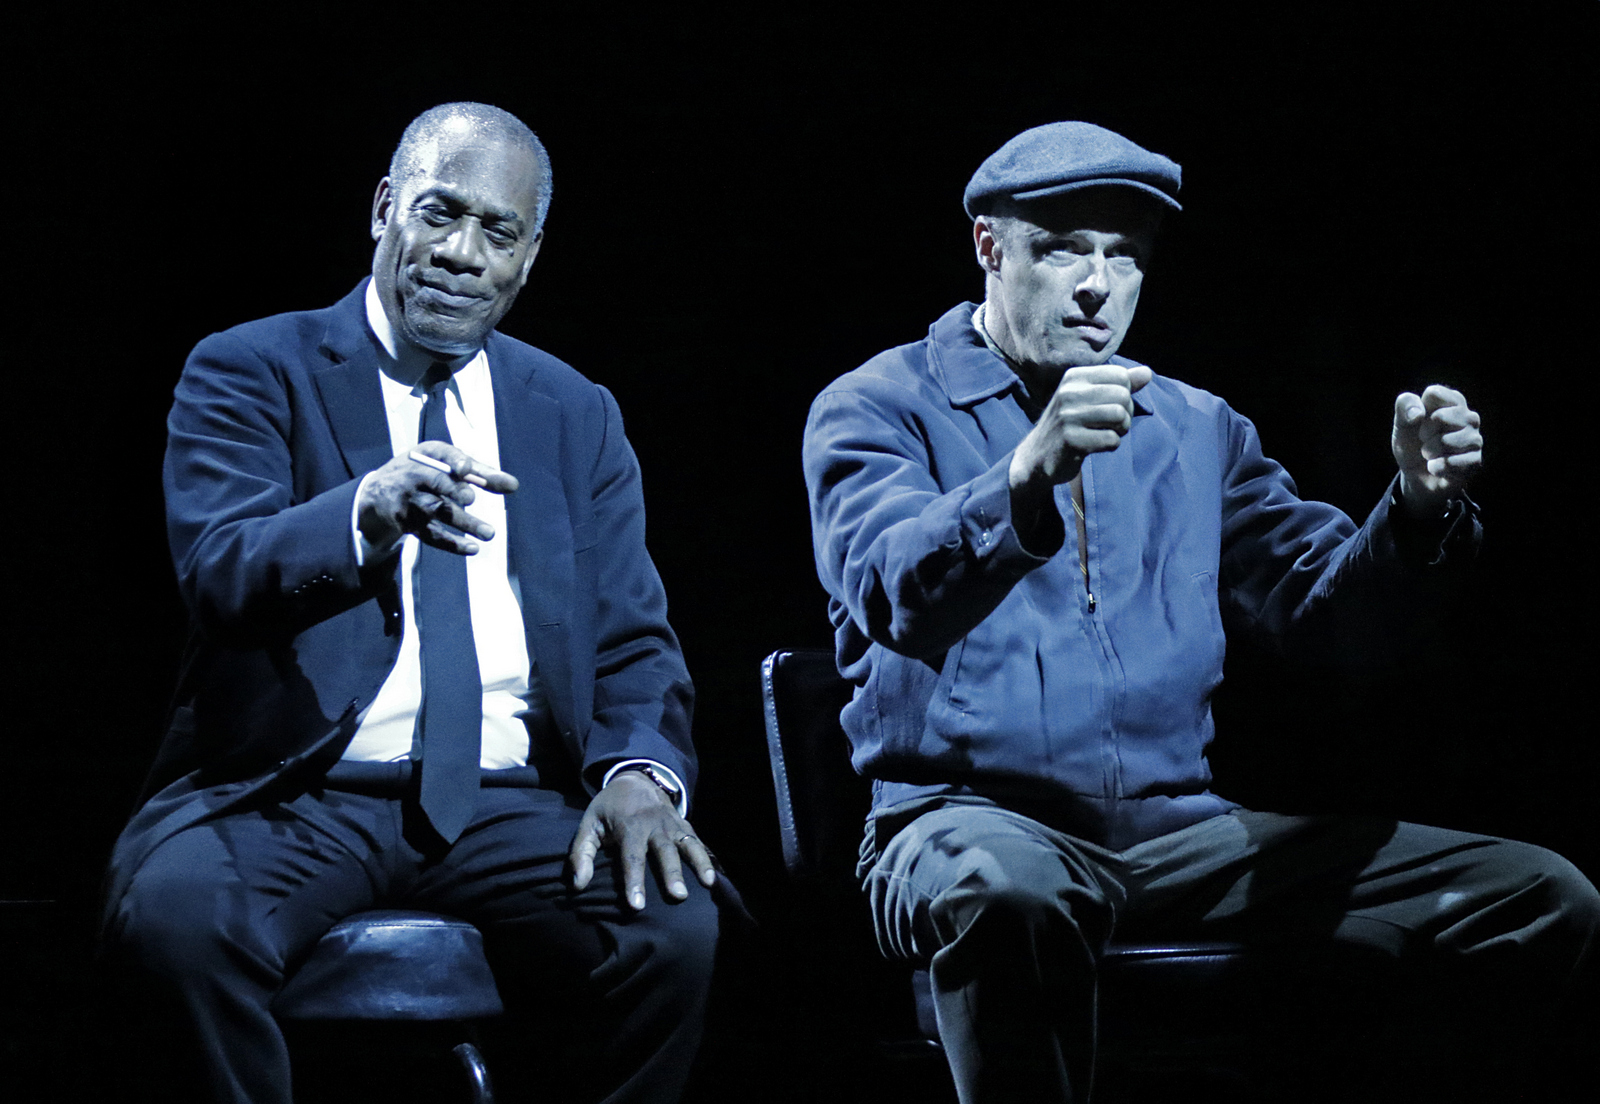 Turn Me Loose at the Wallis Annenberg Center for the Performing Arts. Pictured (l-r): Joe Morton and John Carlin. Photo credit: Lawrence K. Ho.